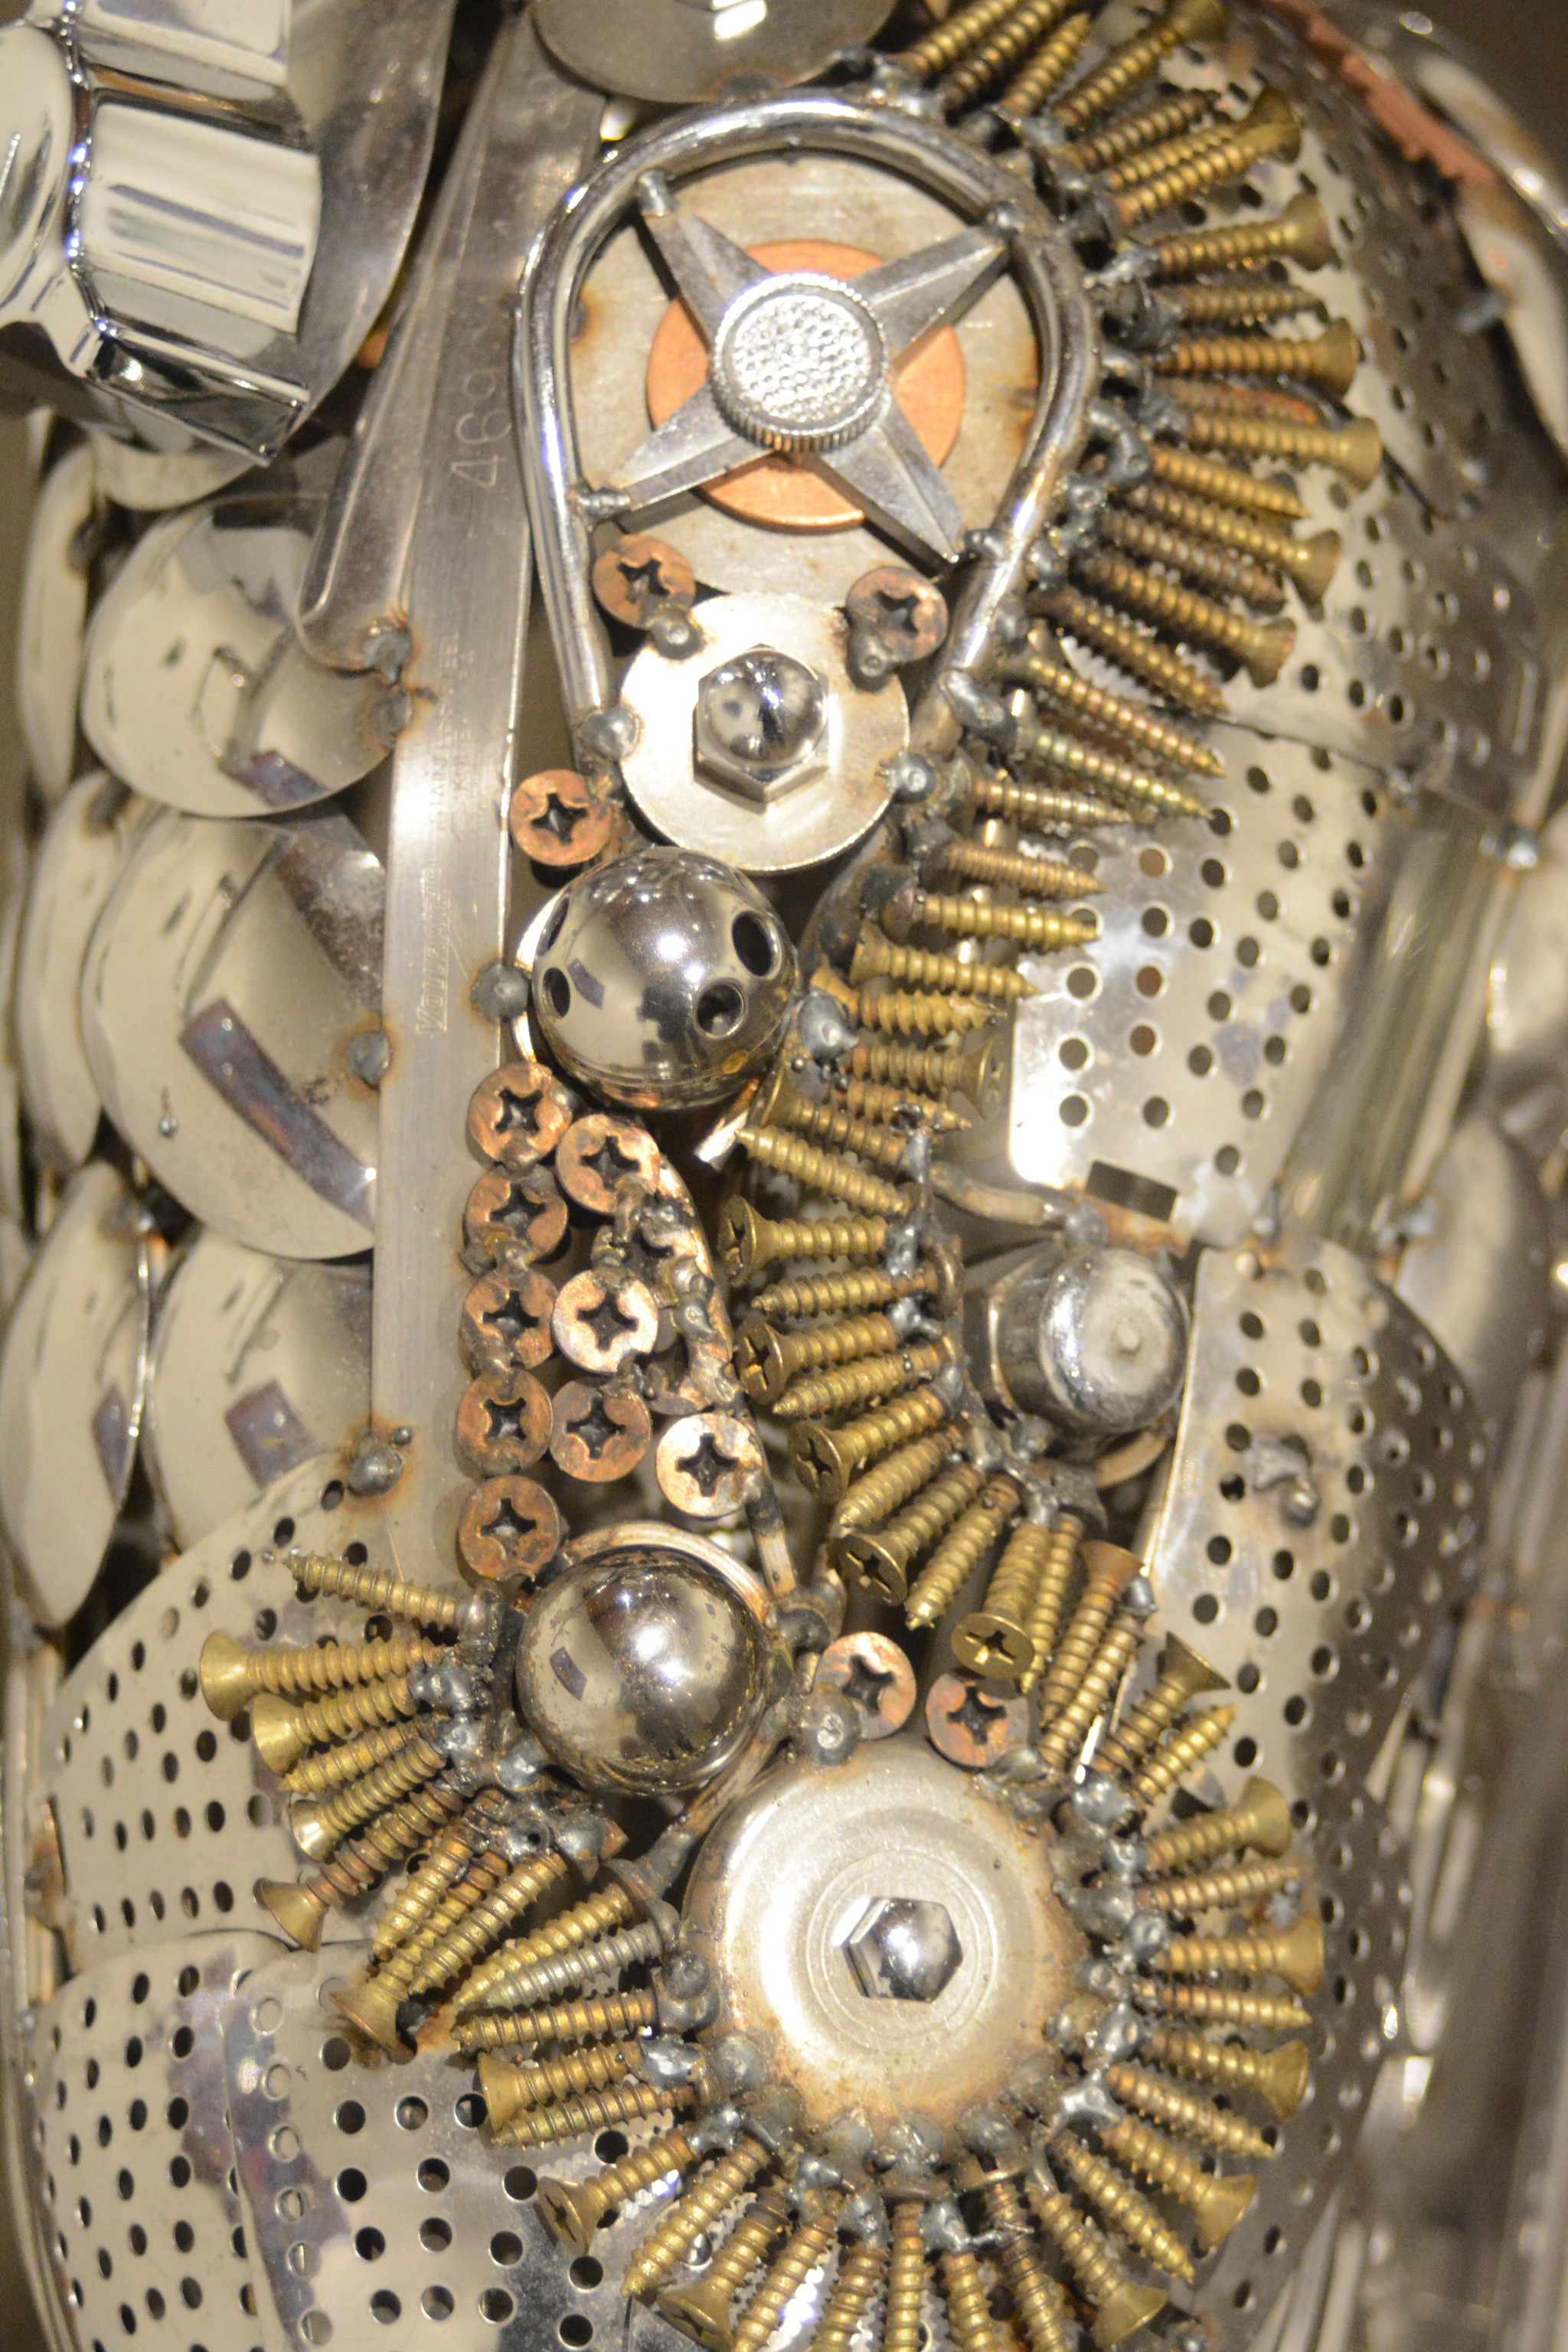 A close up of an engine on one of Don Henry’s art bikes.